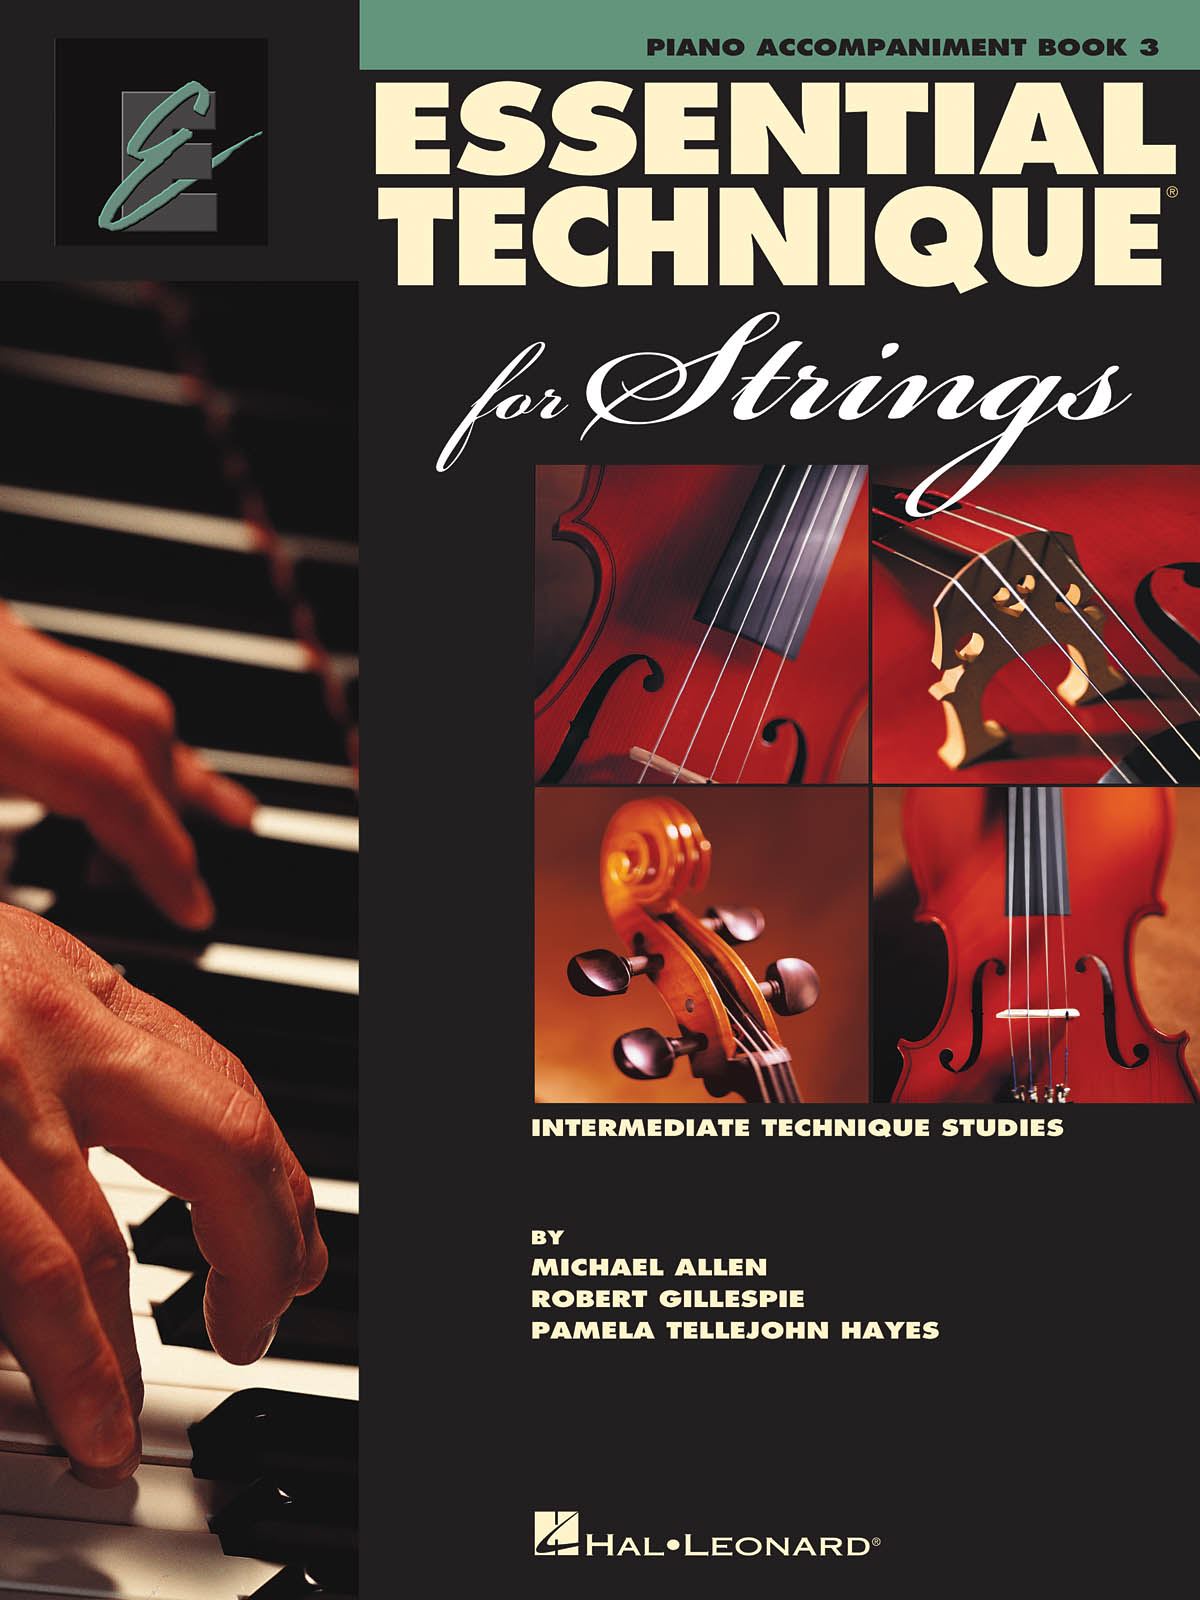 Essential Technique 2000 for Strings - Book 3: Viola and Accomp.: Part